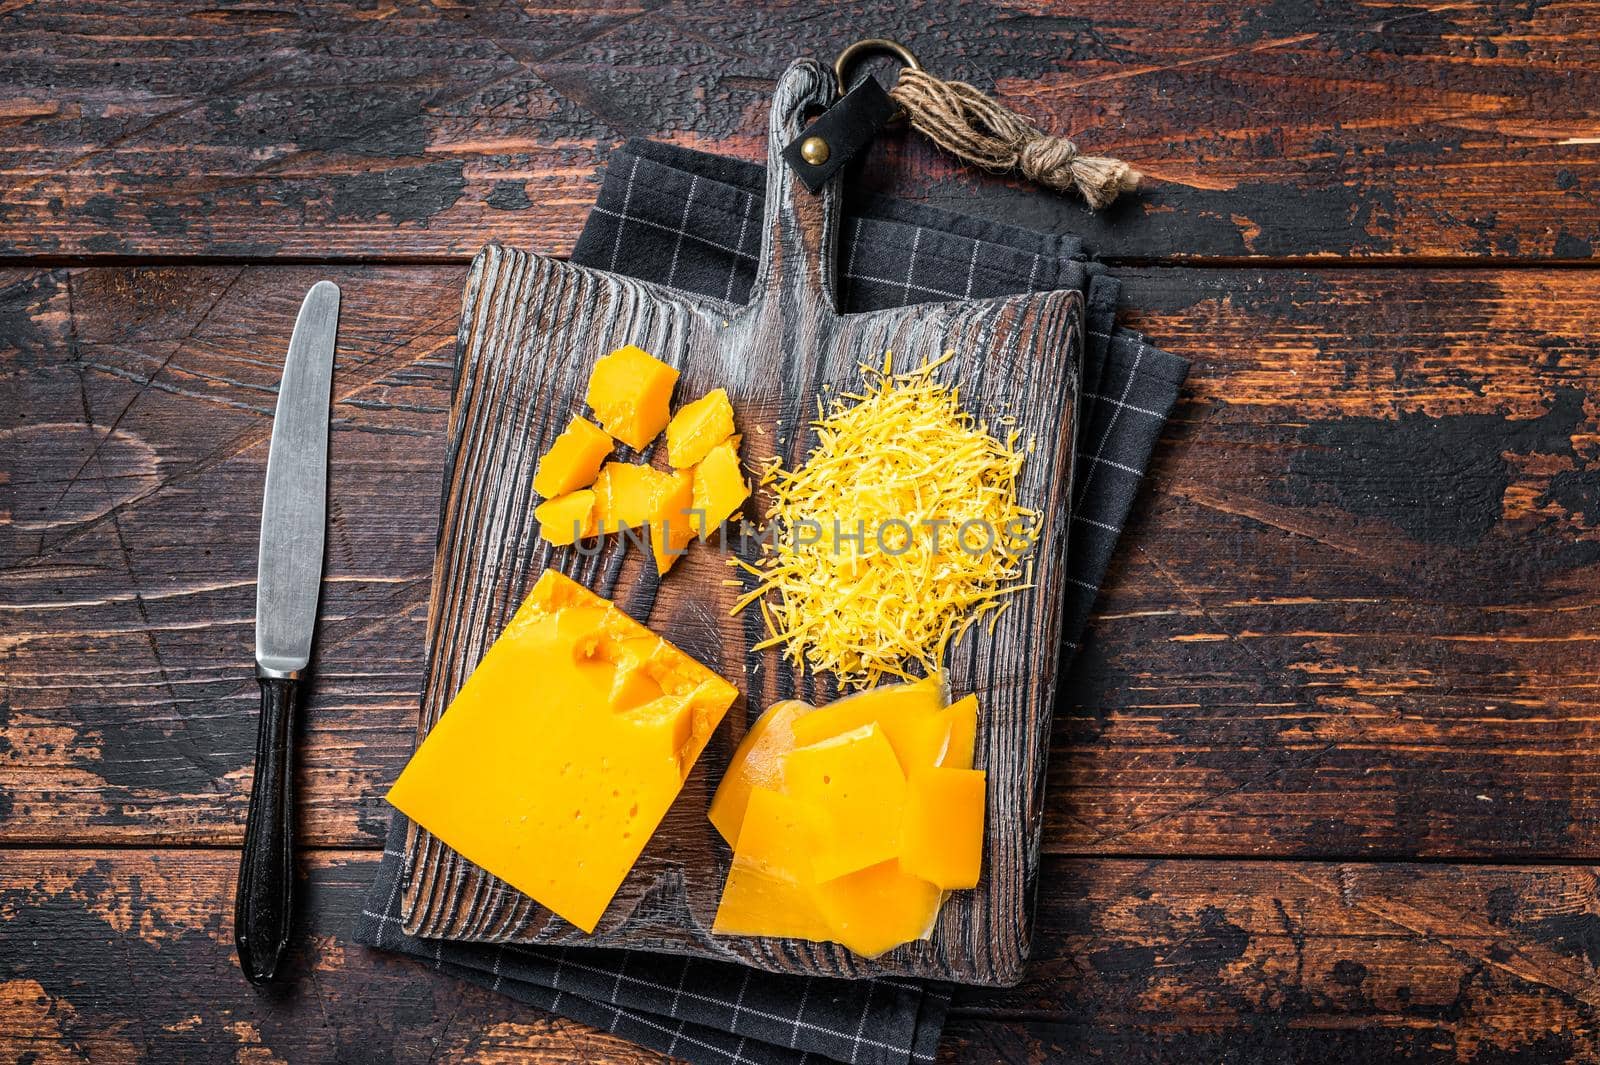 Grated and diceded Cheddar Cheese on a wooden chopping board. Dark wooden background. Top view.